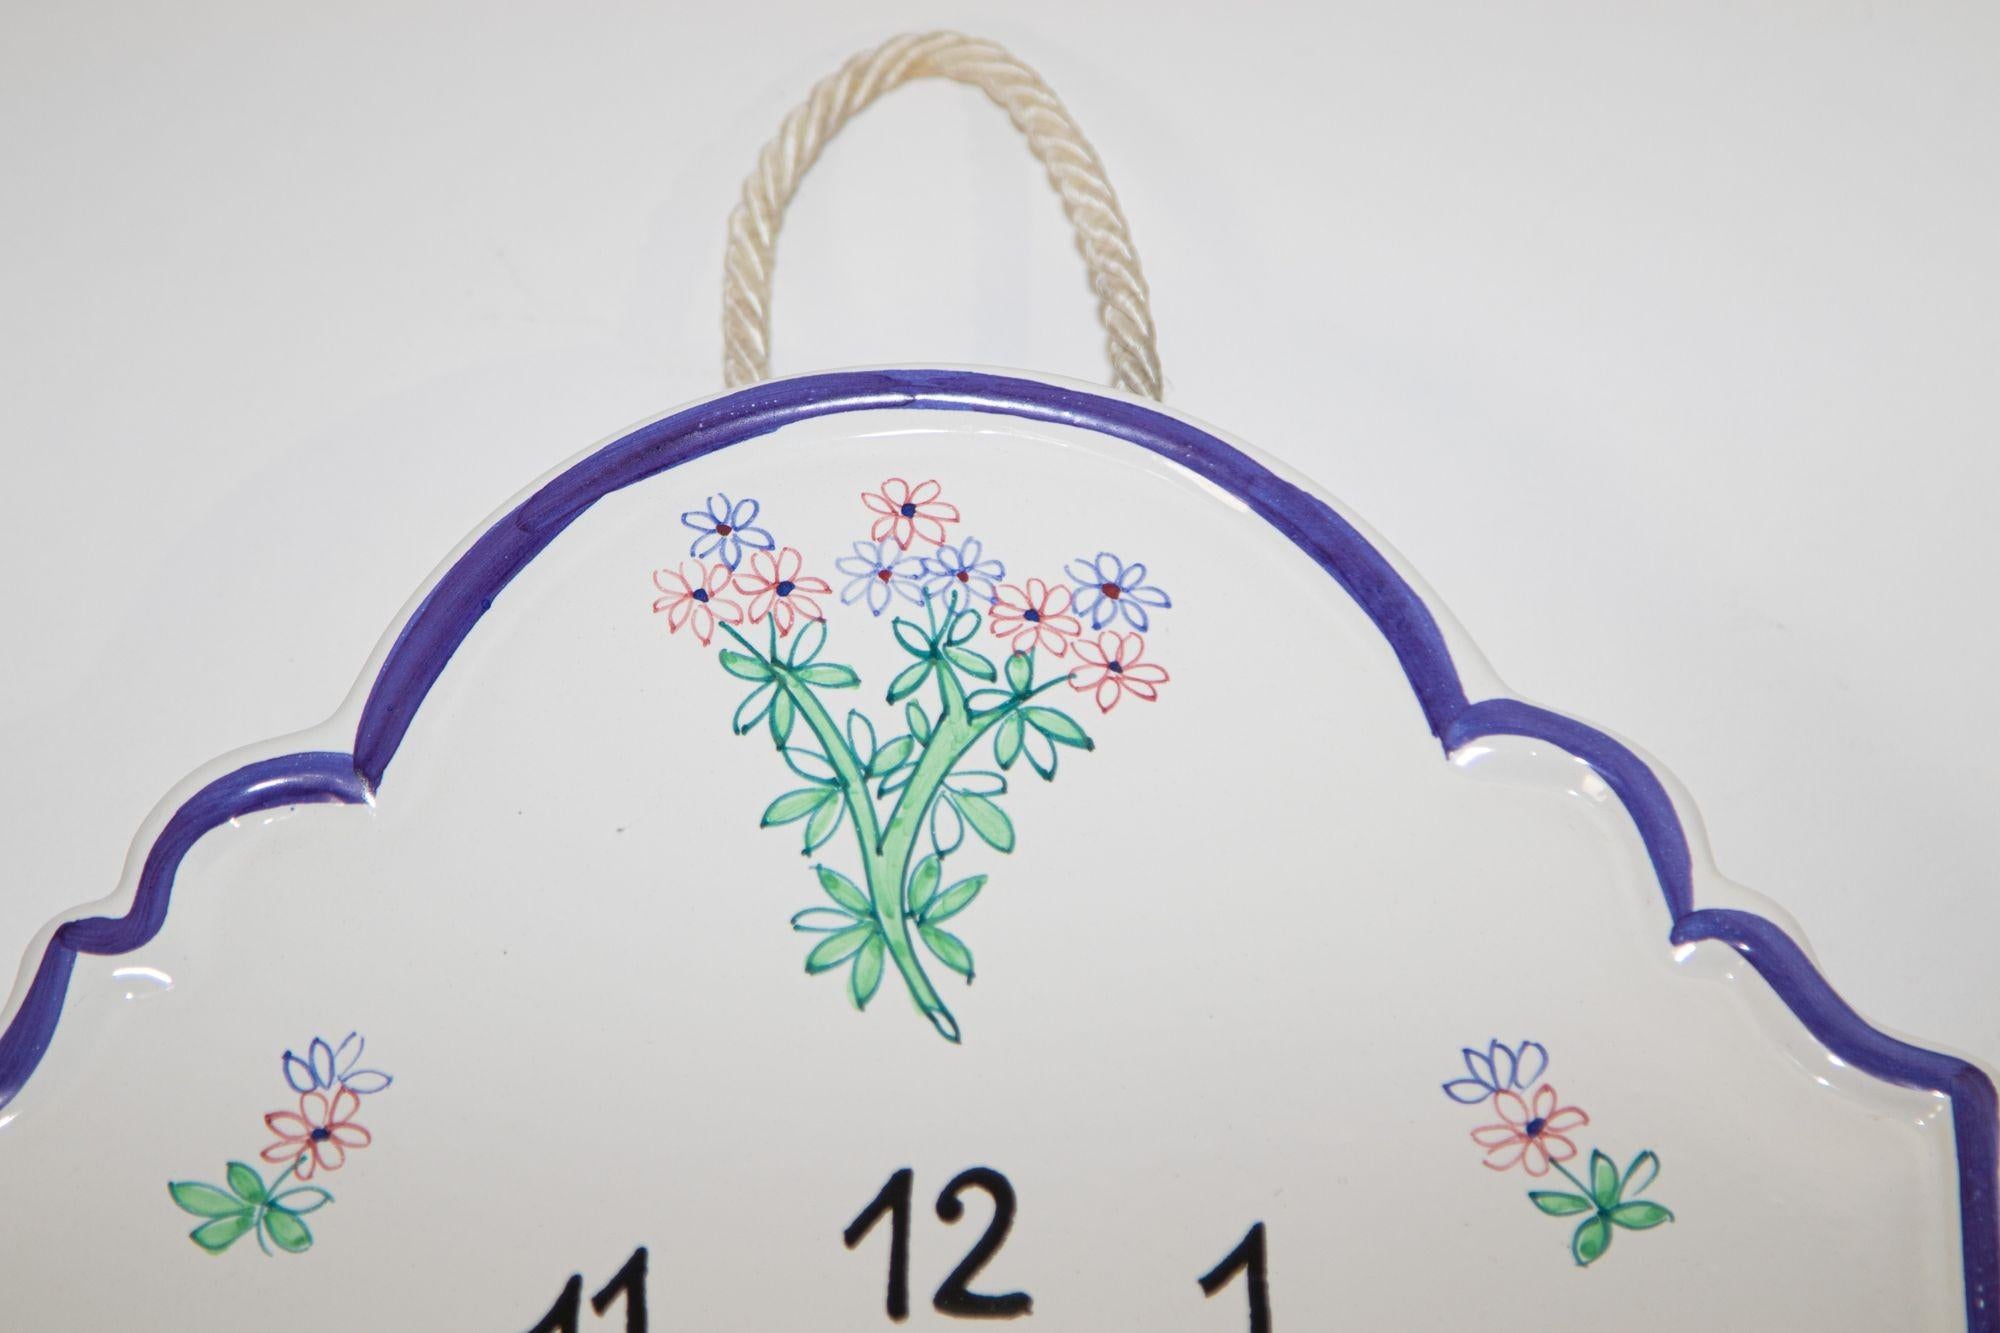 Hand painted ceramic wall clock with Thymus design.
By Fratelli Mari in Deruta, Italy.
Beautiful hand painted wall clock with floral thyme flowers. Perfect for your cottage country farmhouse home decor.
The Fratelli Mari Company was founded in